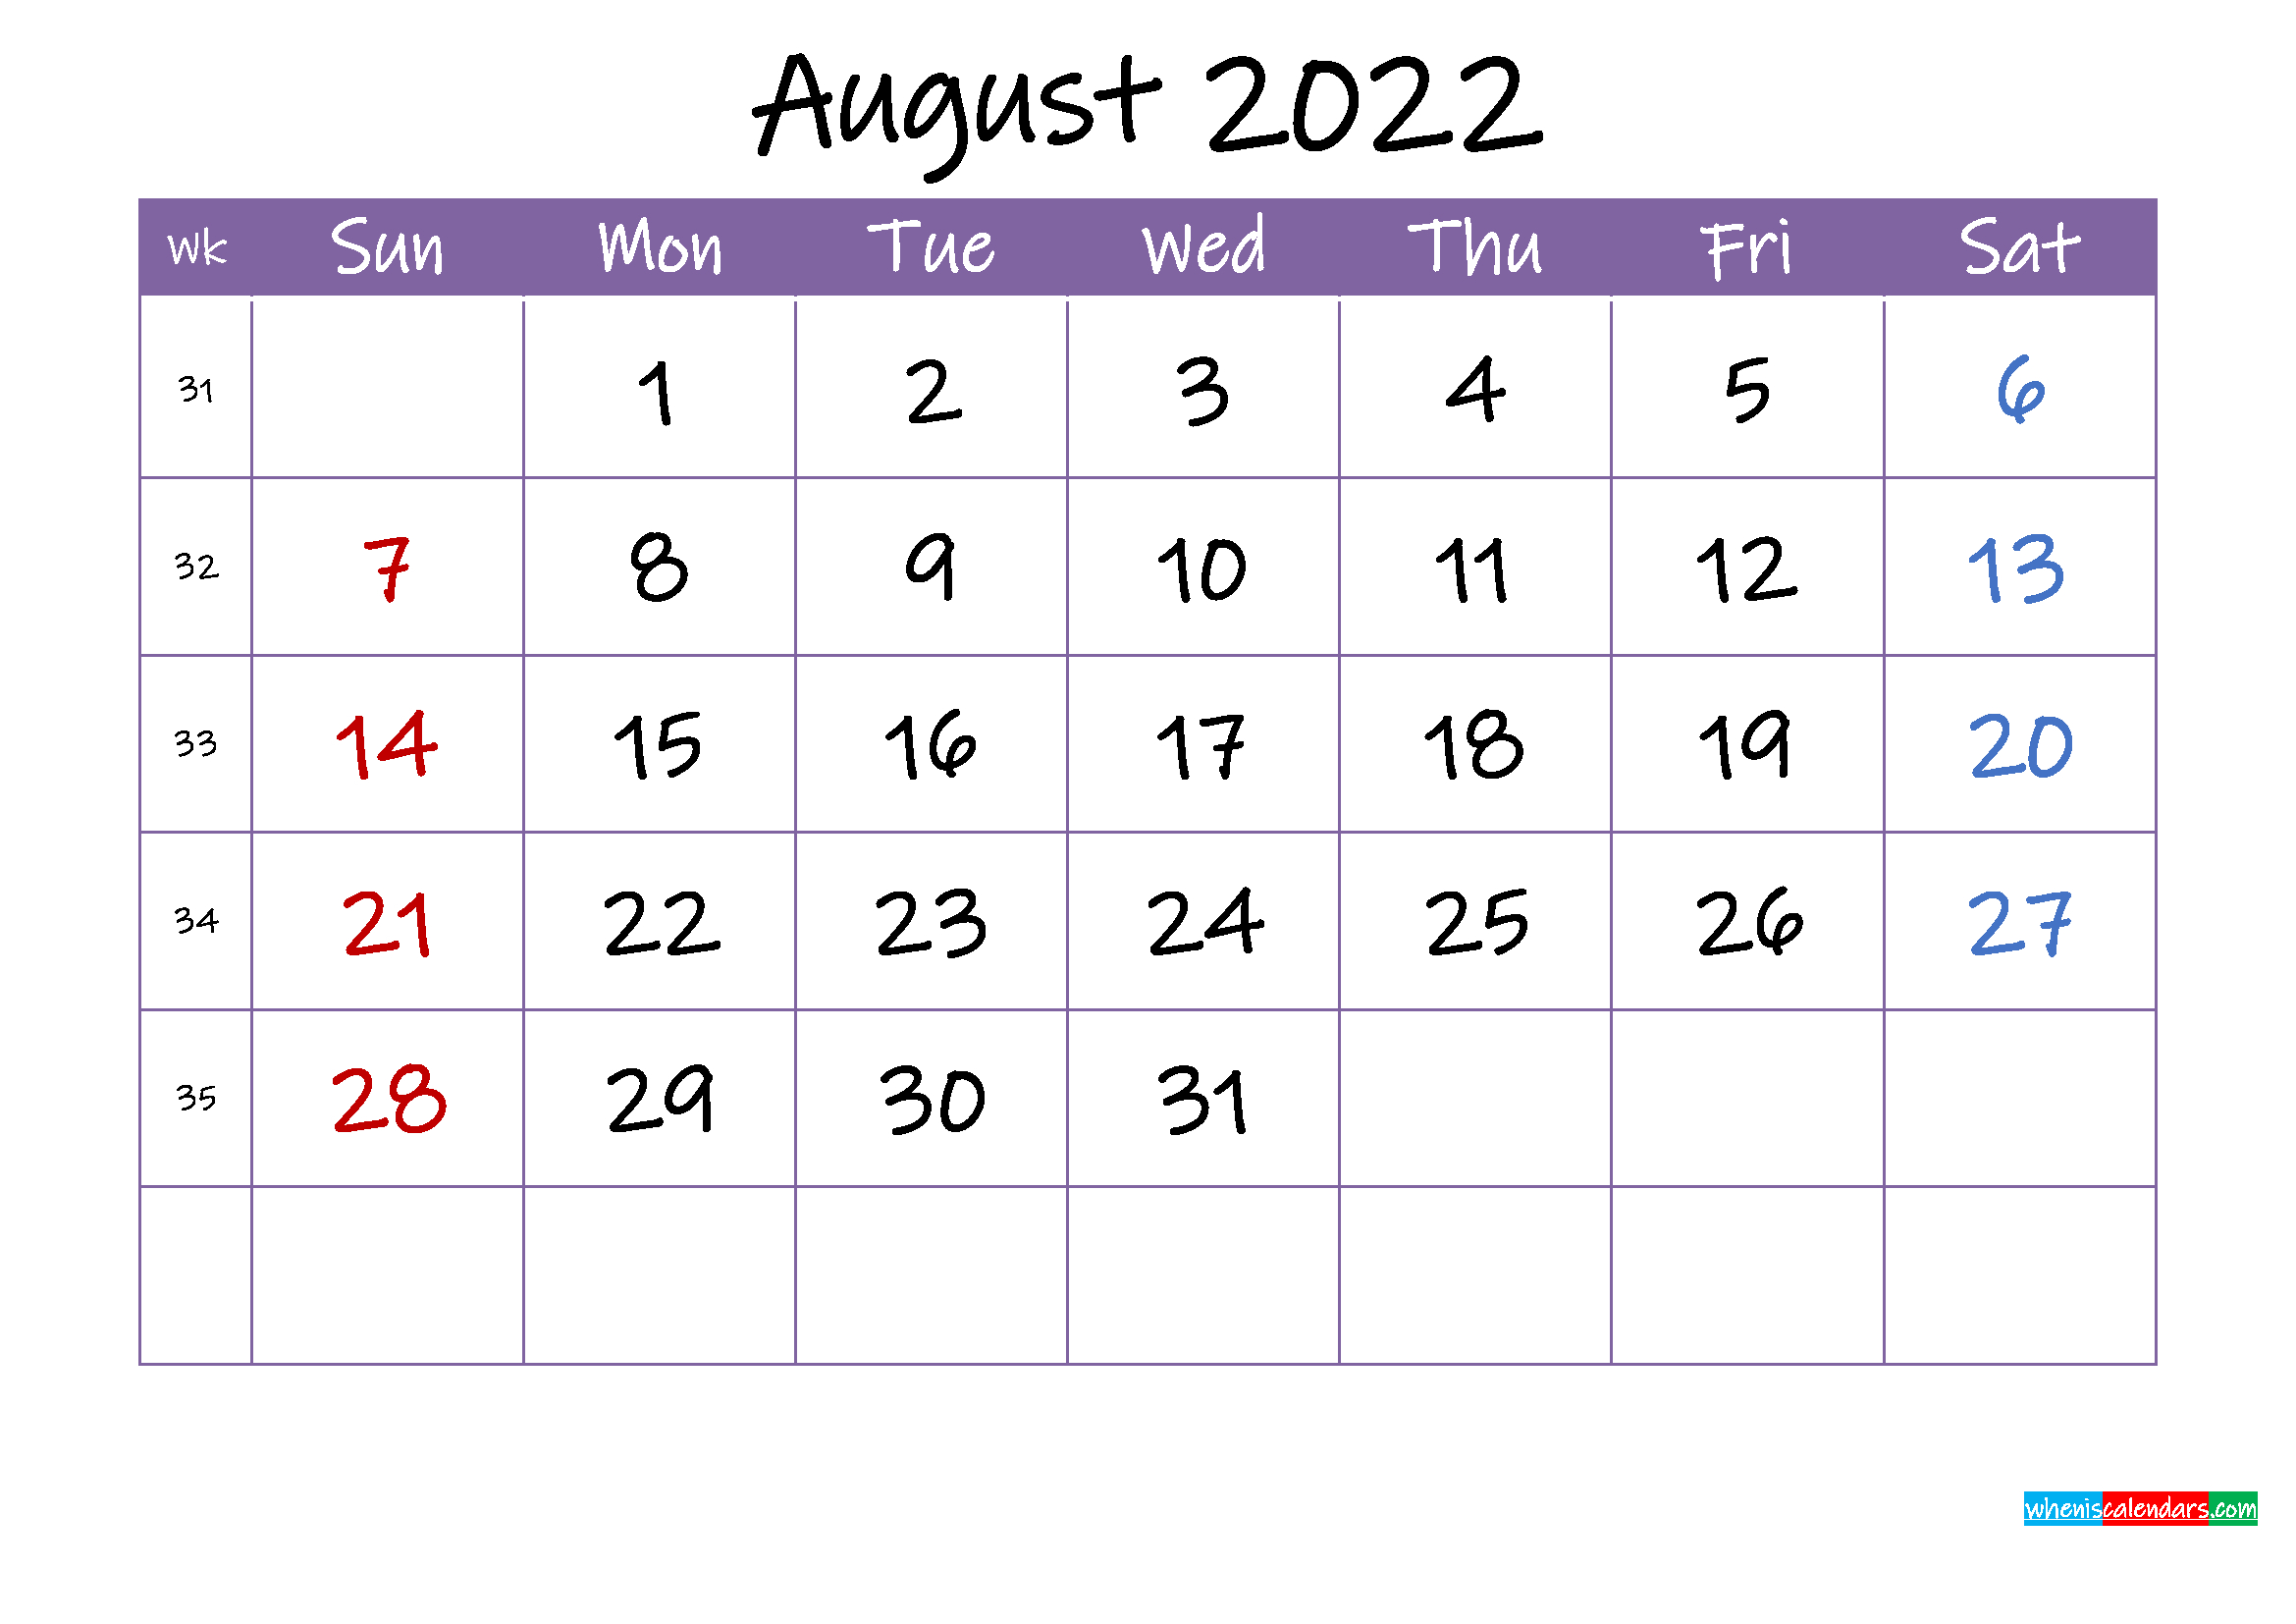 August 2022 Calendar With Holidays Printable - Template